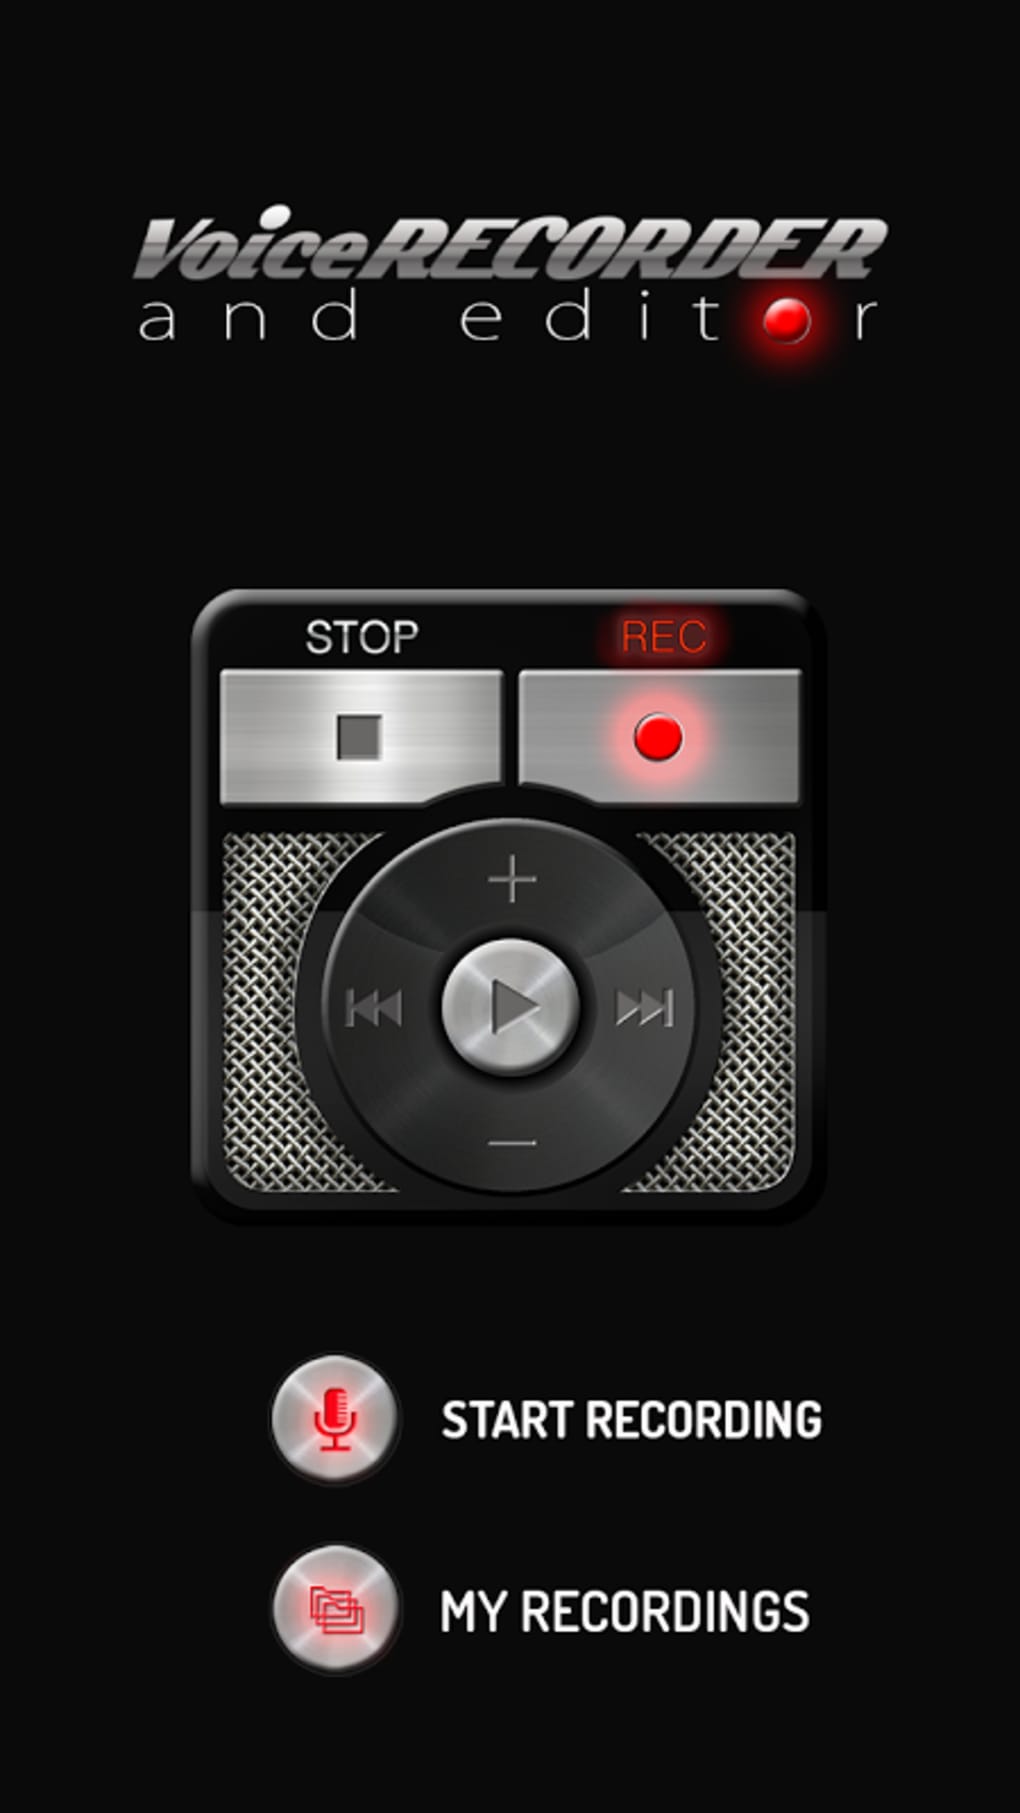 Jew engagement Technology Voice Recorder and Editor for Android - Download